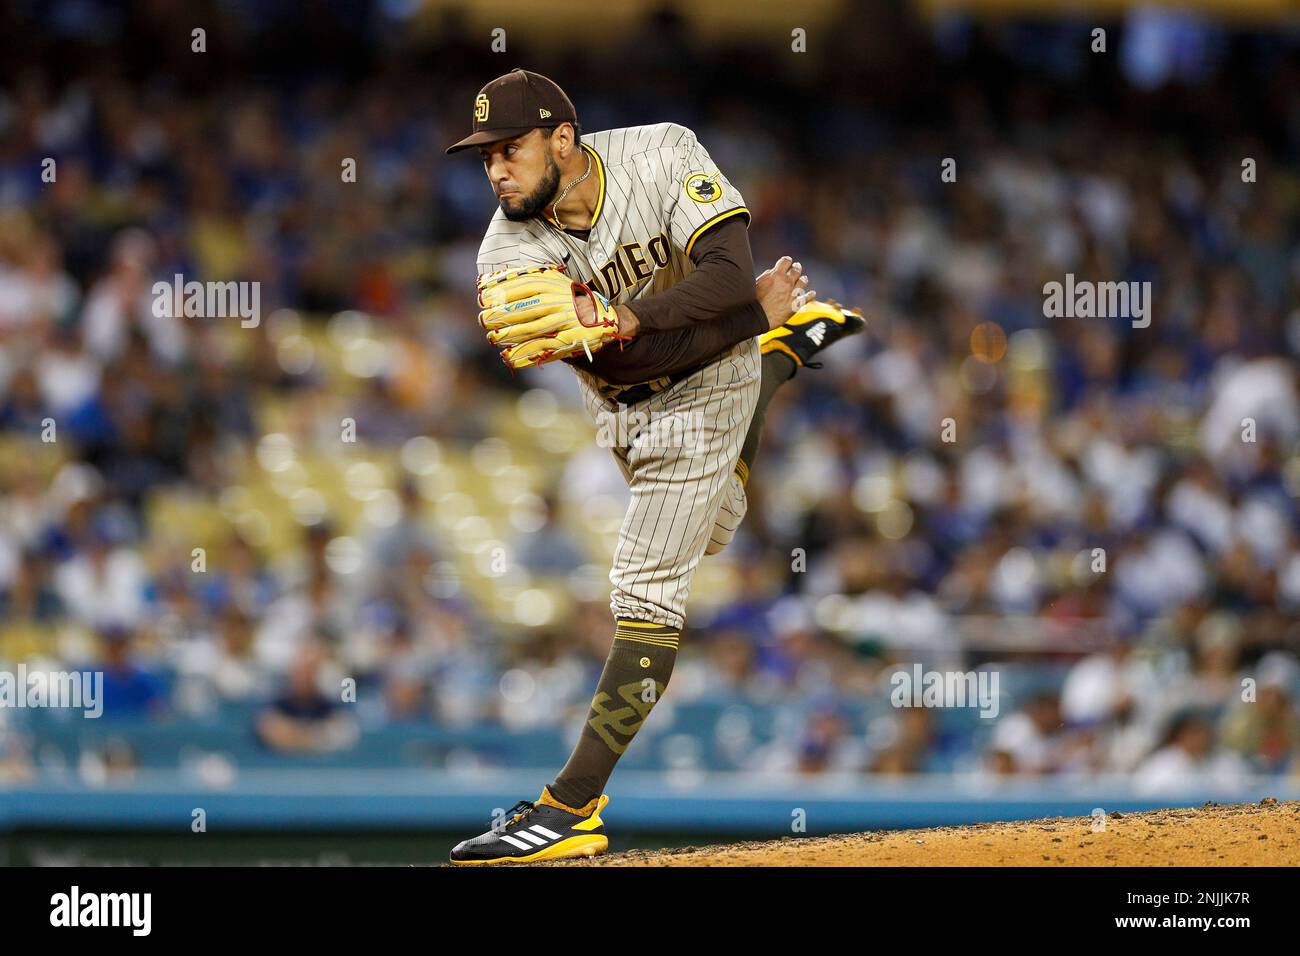 LOS ANGELES, CA - AUGUST 06: San Diego Padres pitcher Robert Suarez (75)  during a regular season game between the San Diego Padres and Los Angeles  Dodgers on August 06, 2022, at